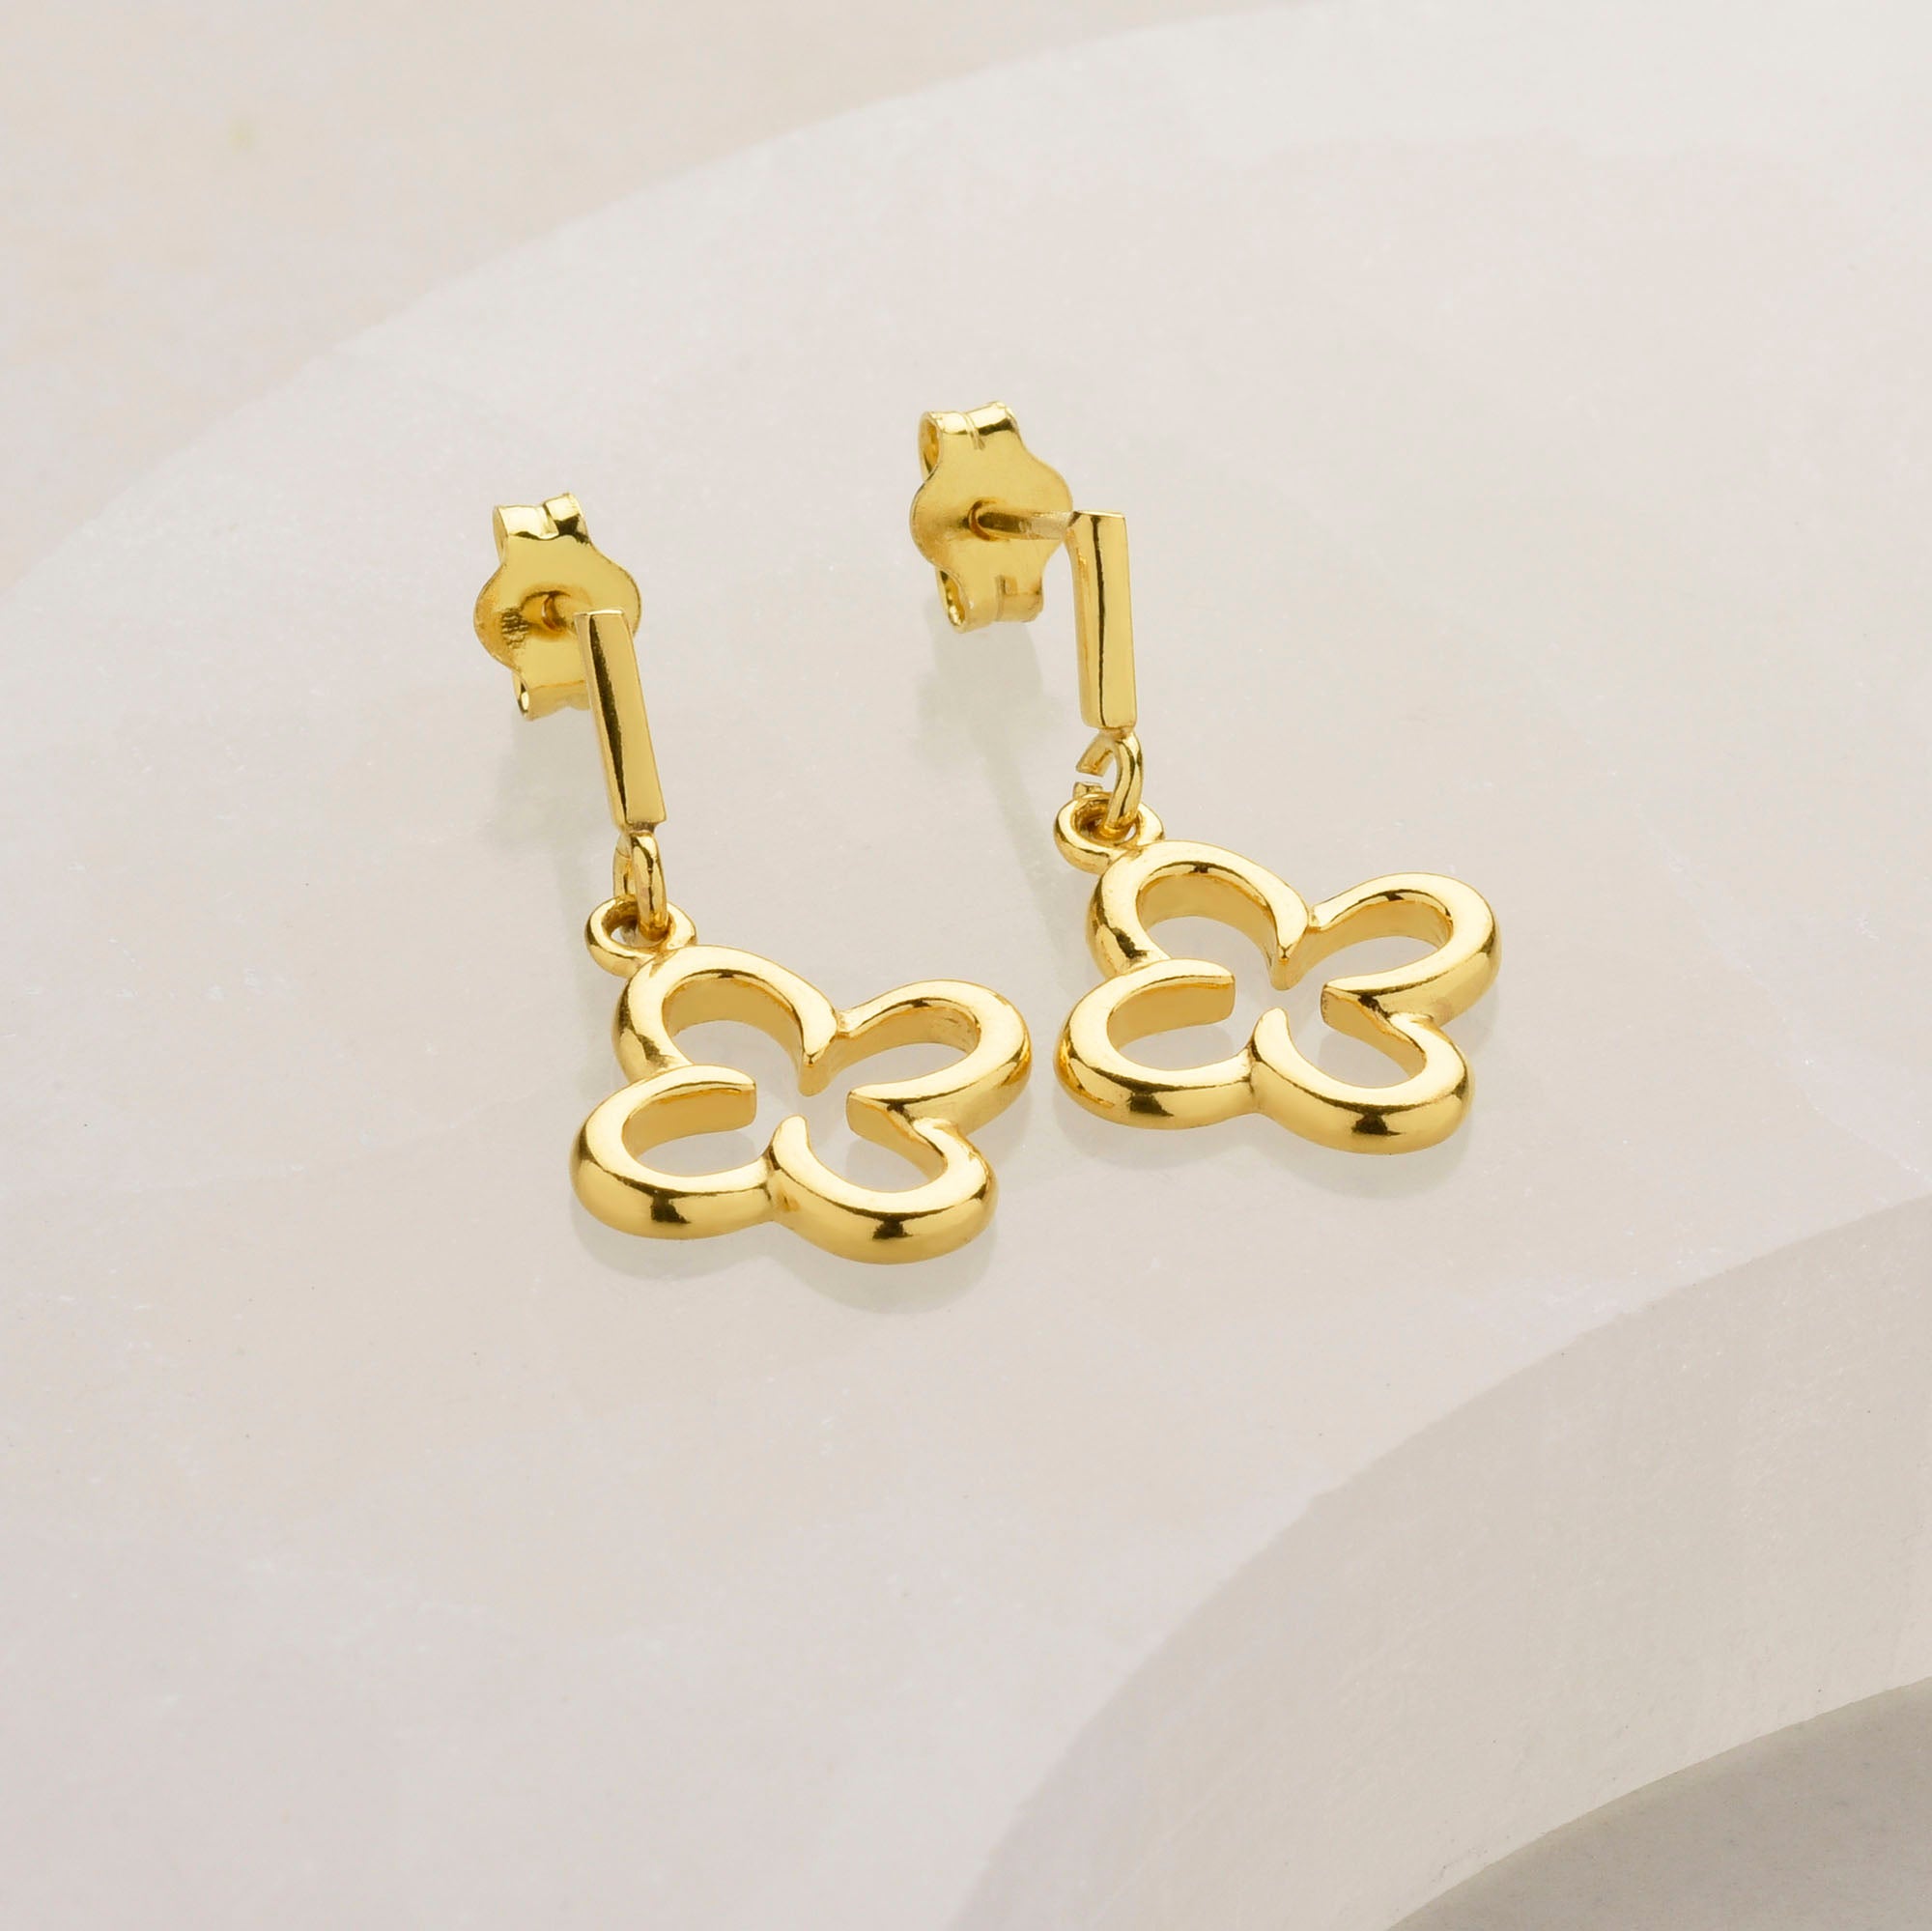 pair of gold eardrops in a clover design laid on a gemstone